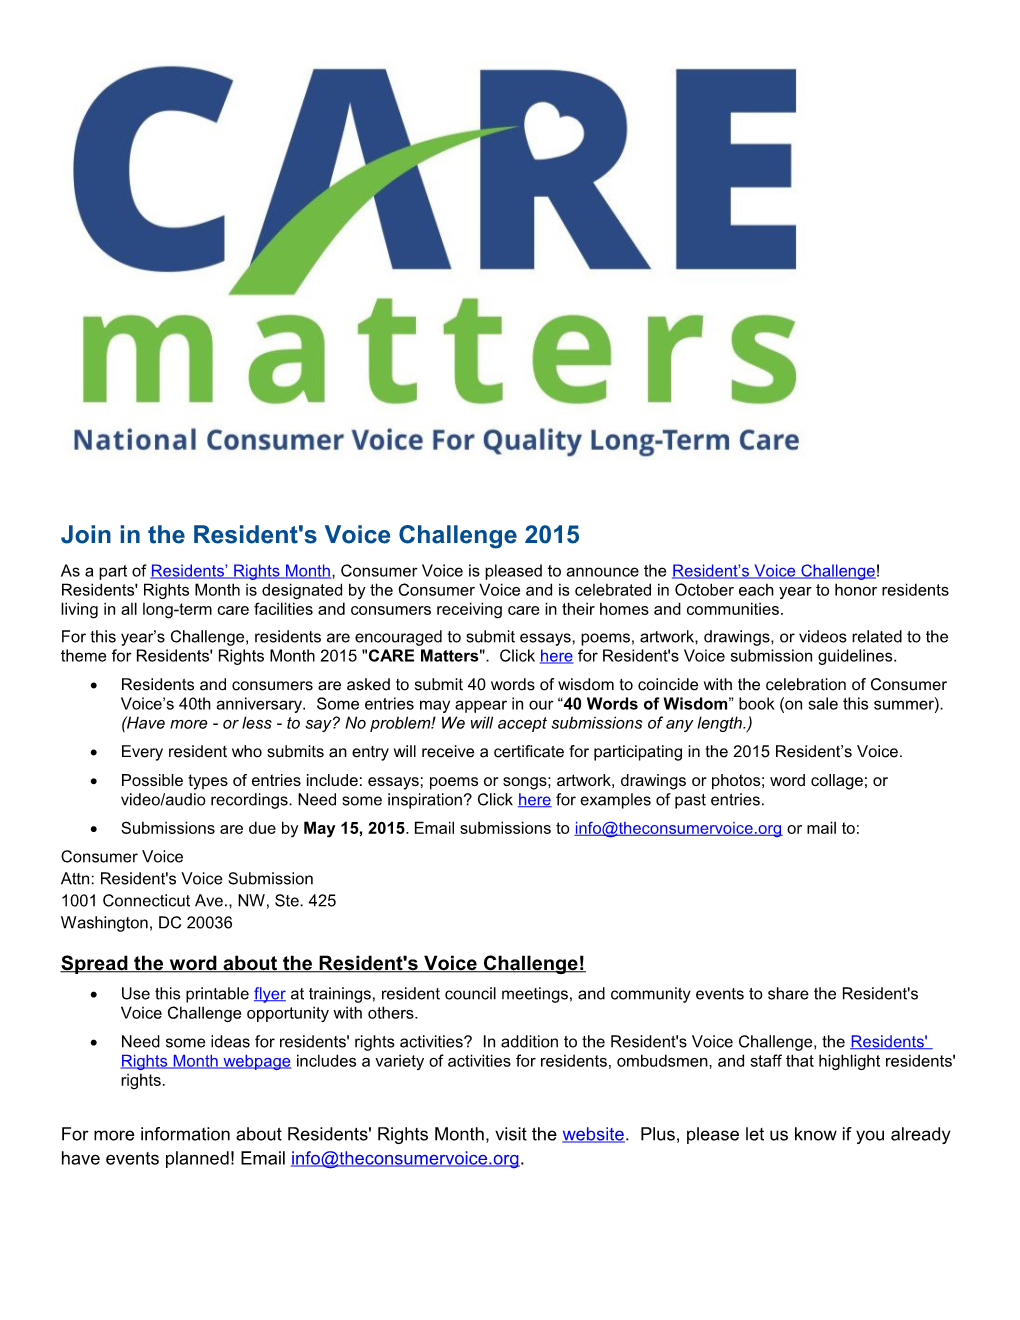 Join in the Resident's Voice Challenge 2015